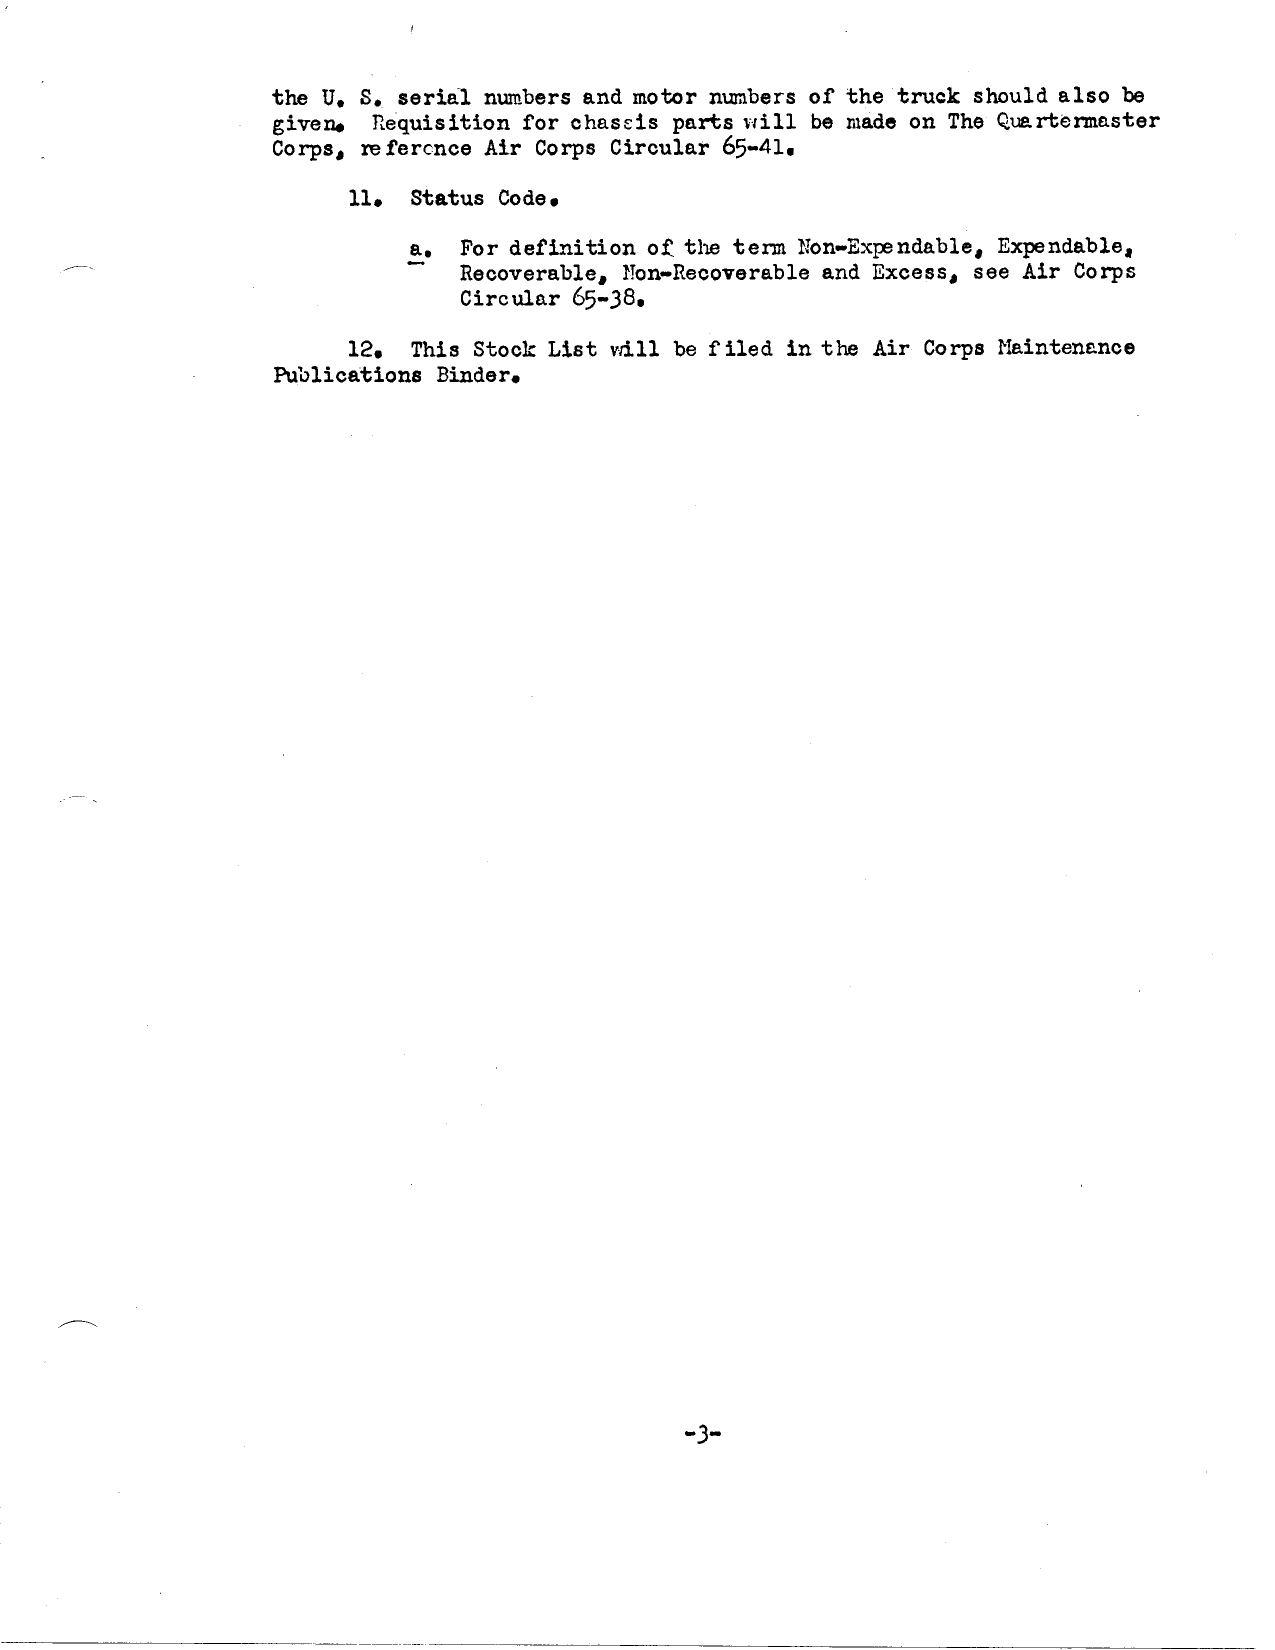 Sample page 5 from AirCorps Library document: Stock List for Field and Hanger Equipment